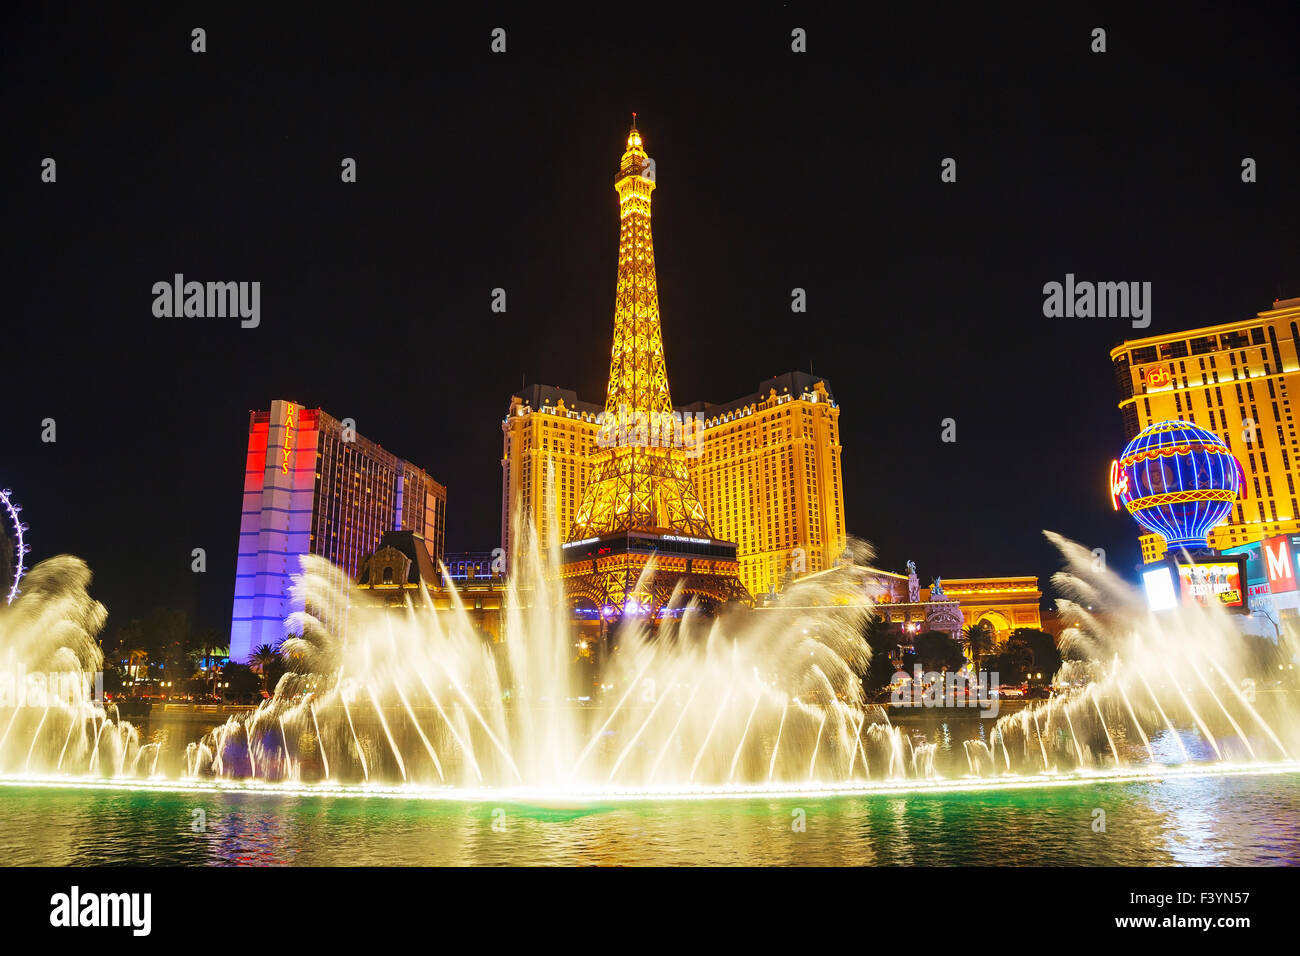 Fountains show in Las Vegas in the night Stock Photo